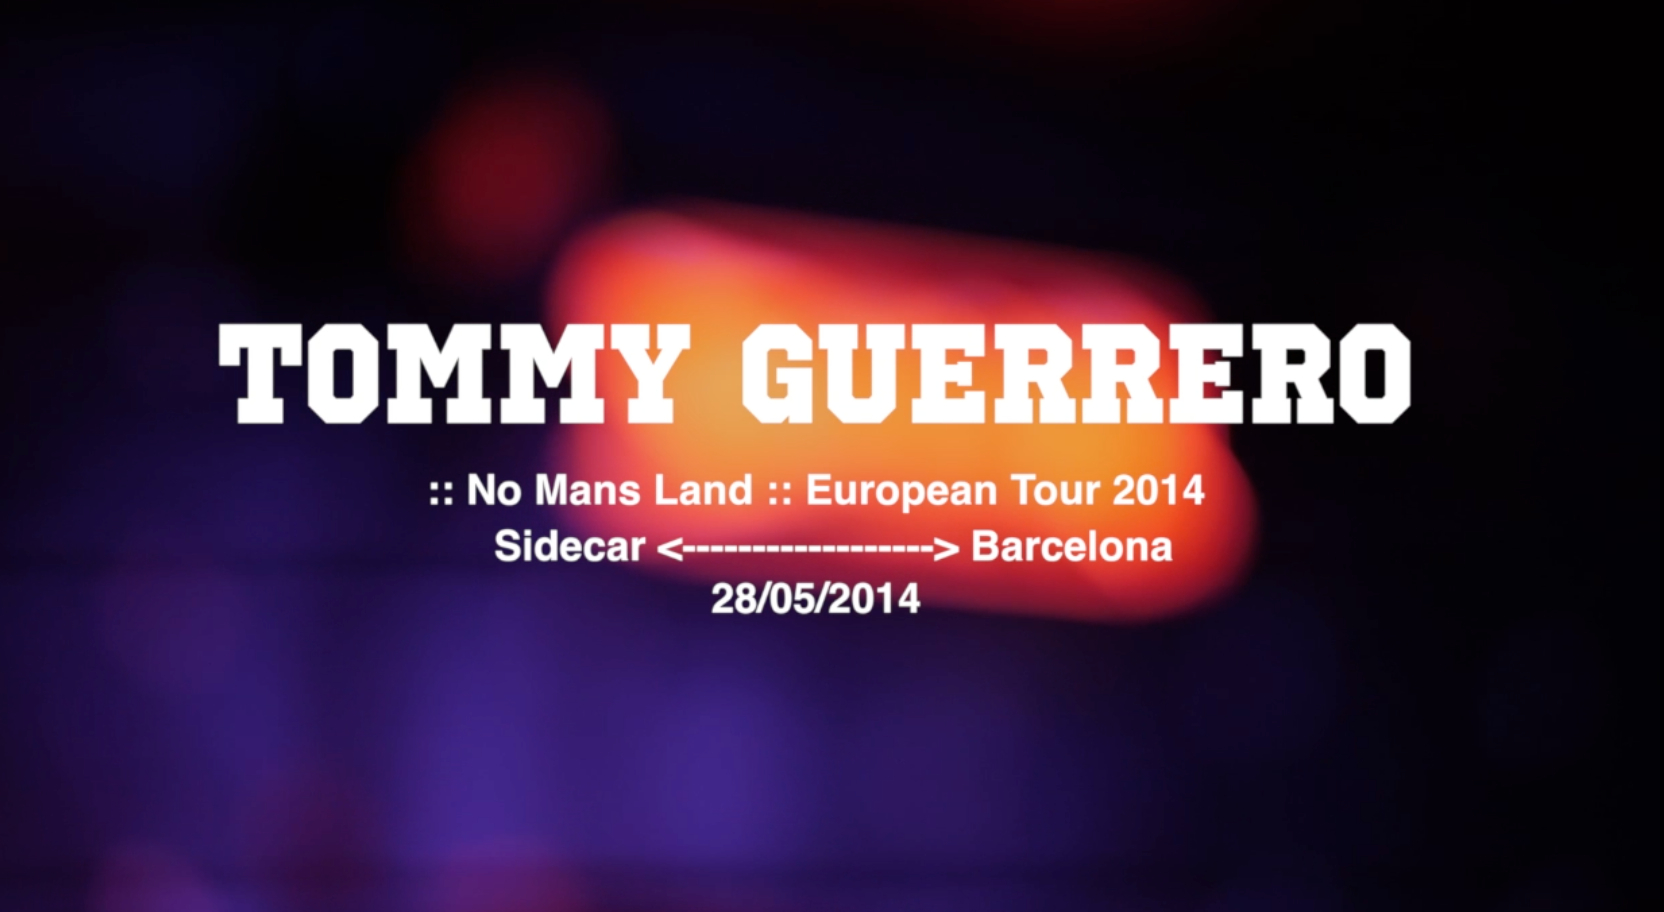 Tommy Guerrero live @ Sidecar Barcelona